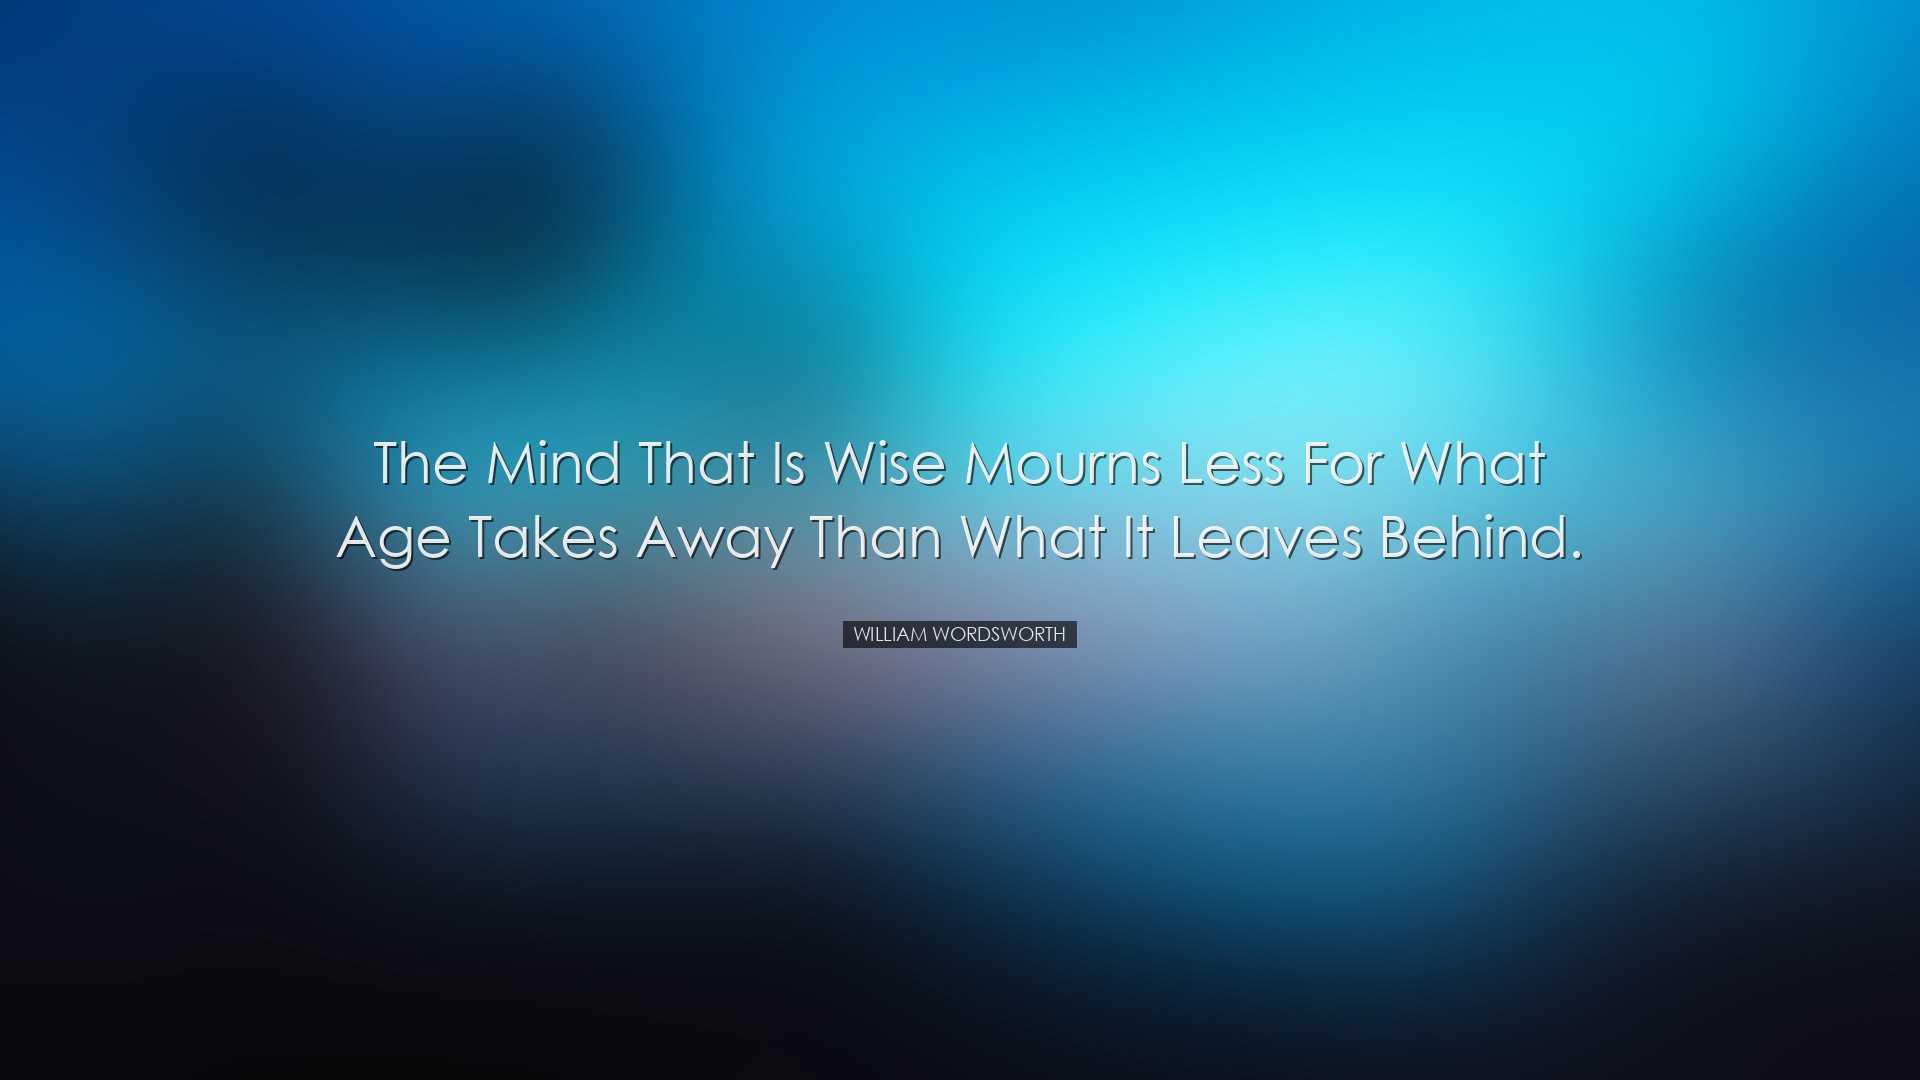 The mind that is wise mourns less for what age takes away than wha